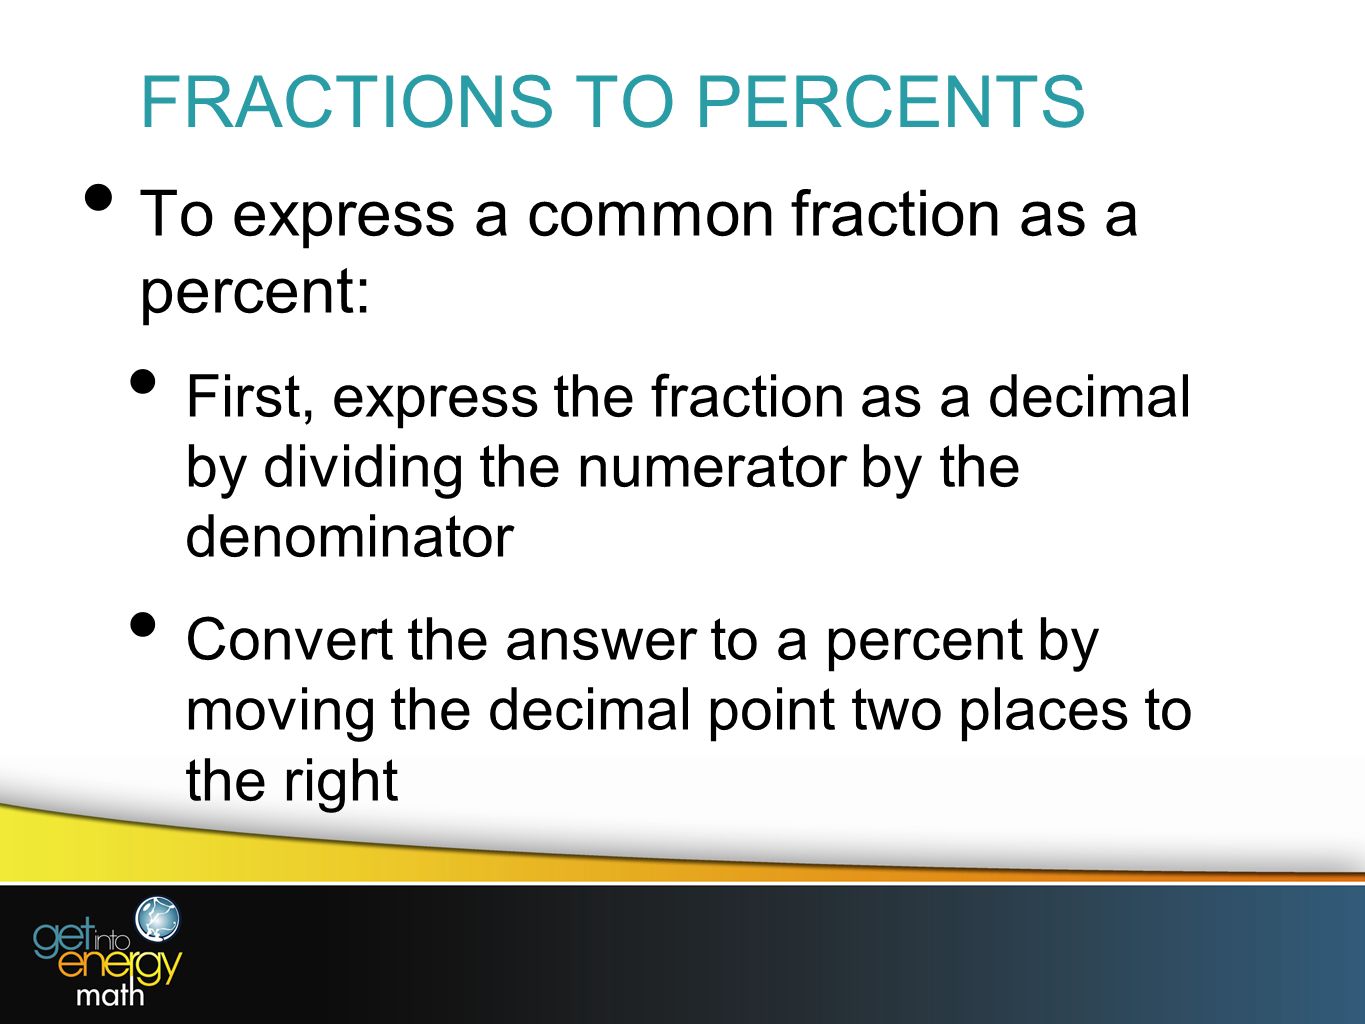 FRACTIONS TO PERCENTS To express a common fraction as a percent: First, express the fraction as a decimal by dividing the numerator by the denominator Convert the answer to a percent by moving the decimal point two places to the right